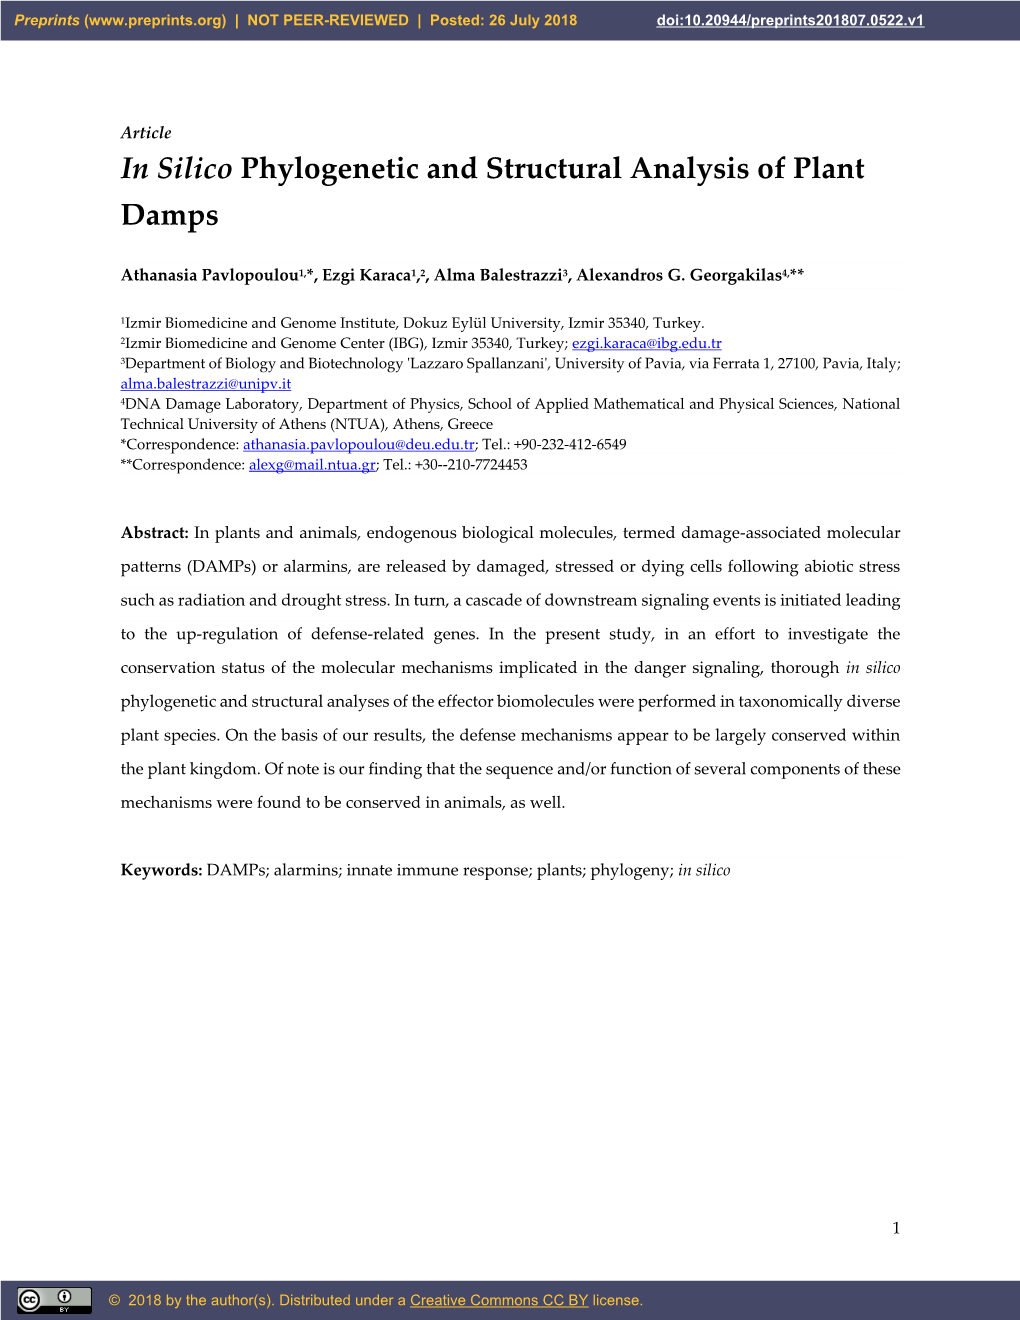 In Silico Phylogenetic and Structural Analysis of Plant Damps